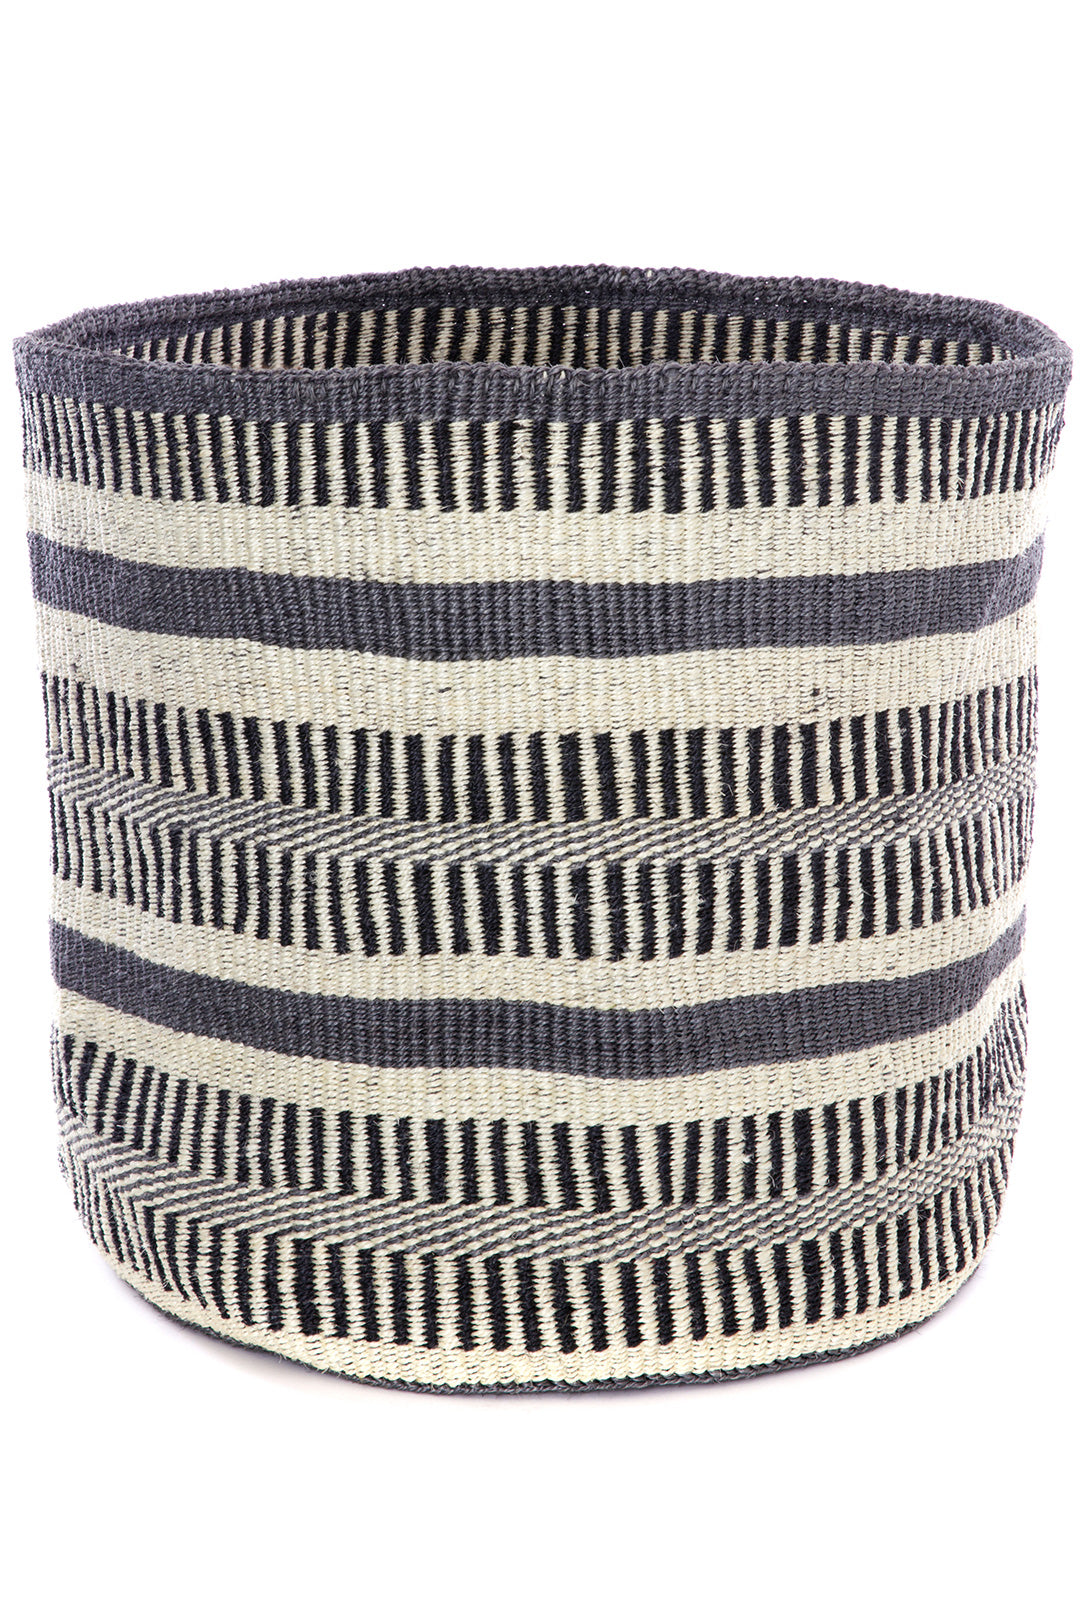 Limited Edition Giant Relaxed Sisal Basket - Gray & Natural